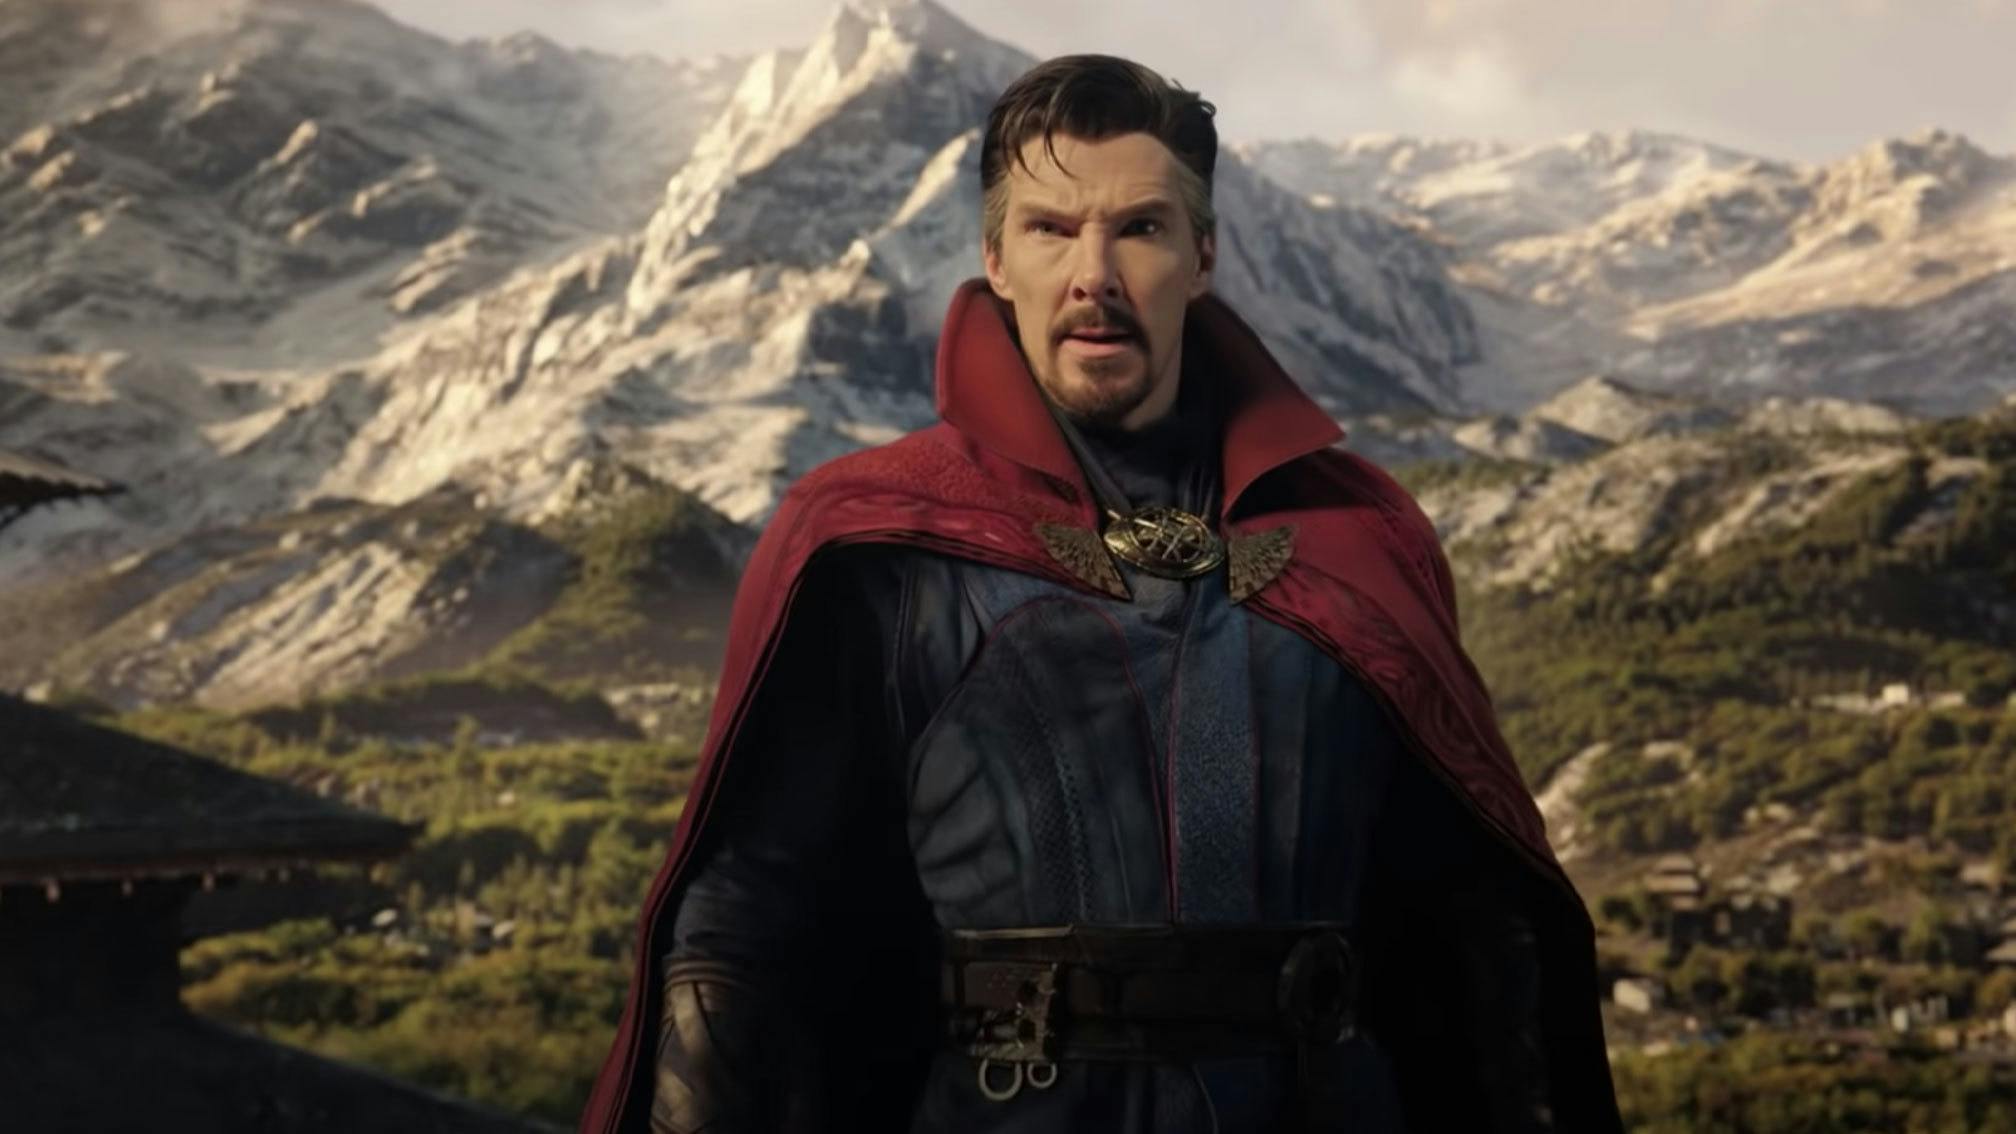 Watch: Marvel’s Doctor Strange In The Multiverse Of Madness trailer debuts during Super Bowl